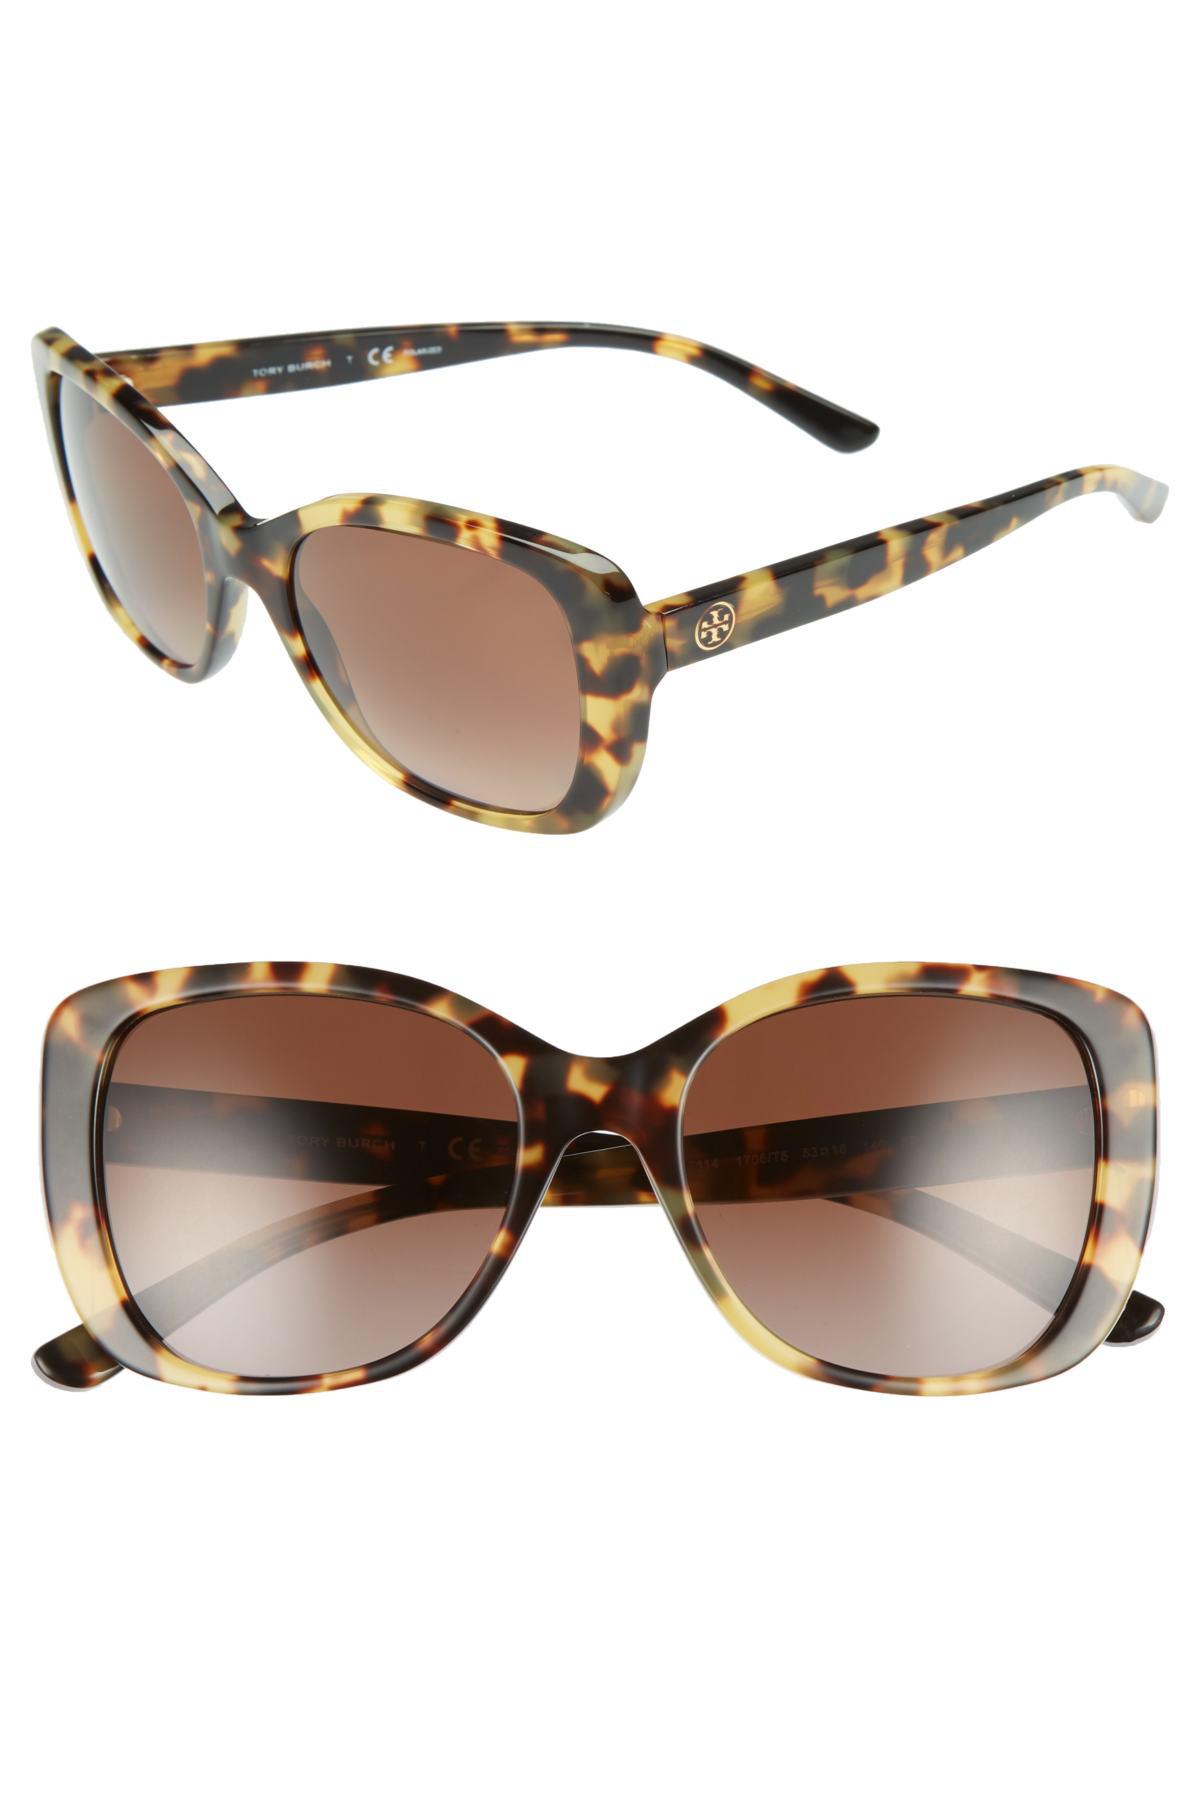 Tory Burch Gradient Rectangle Sunglasses in Brown - Lyst